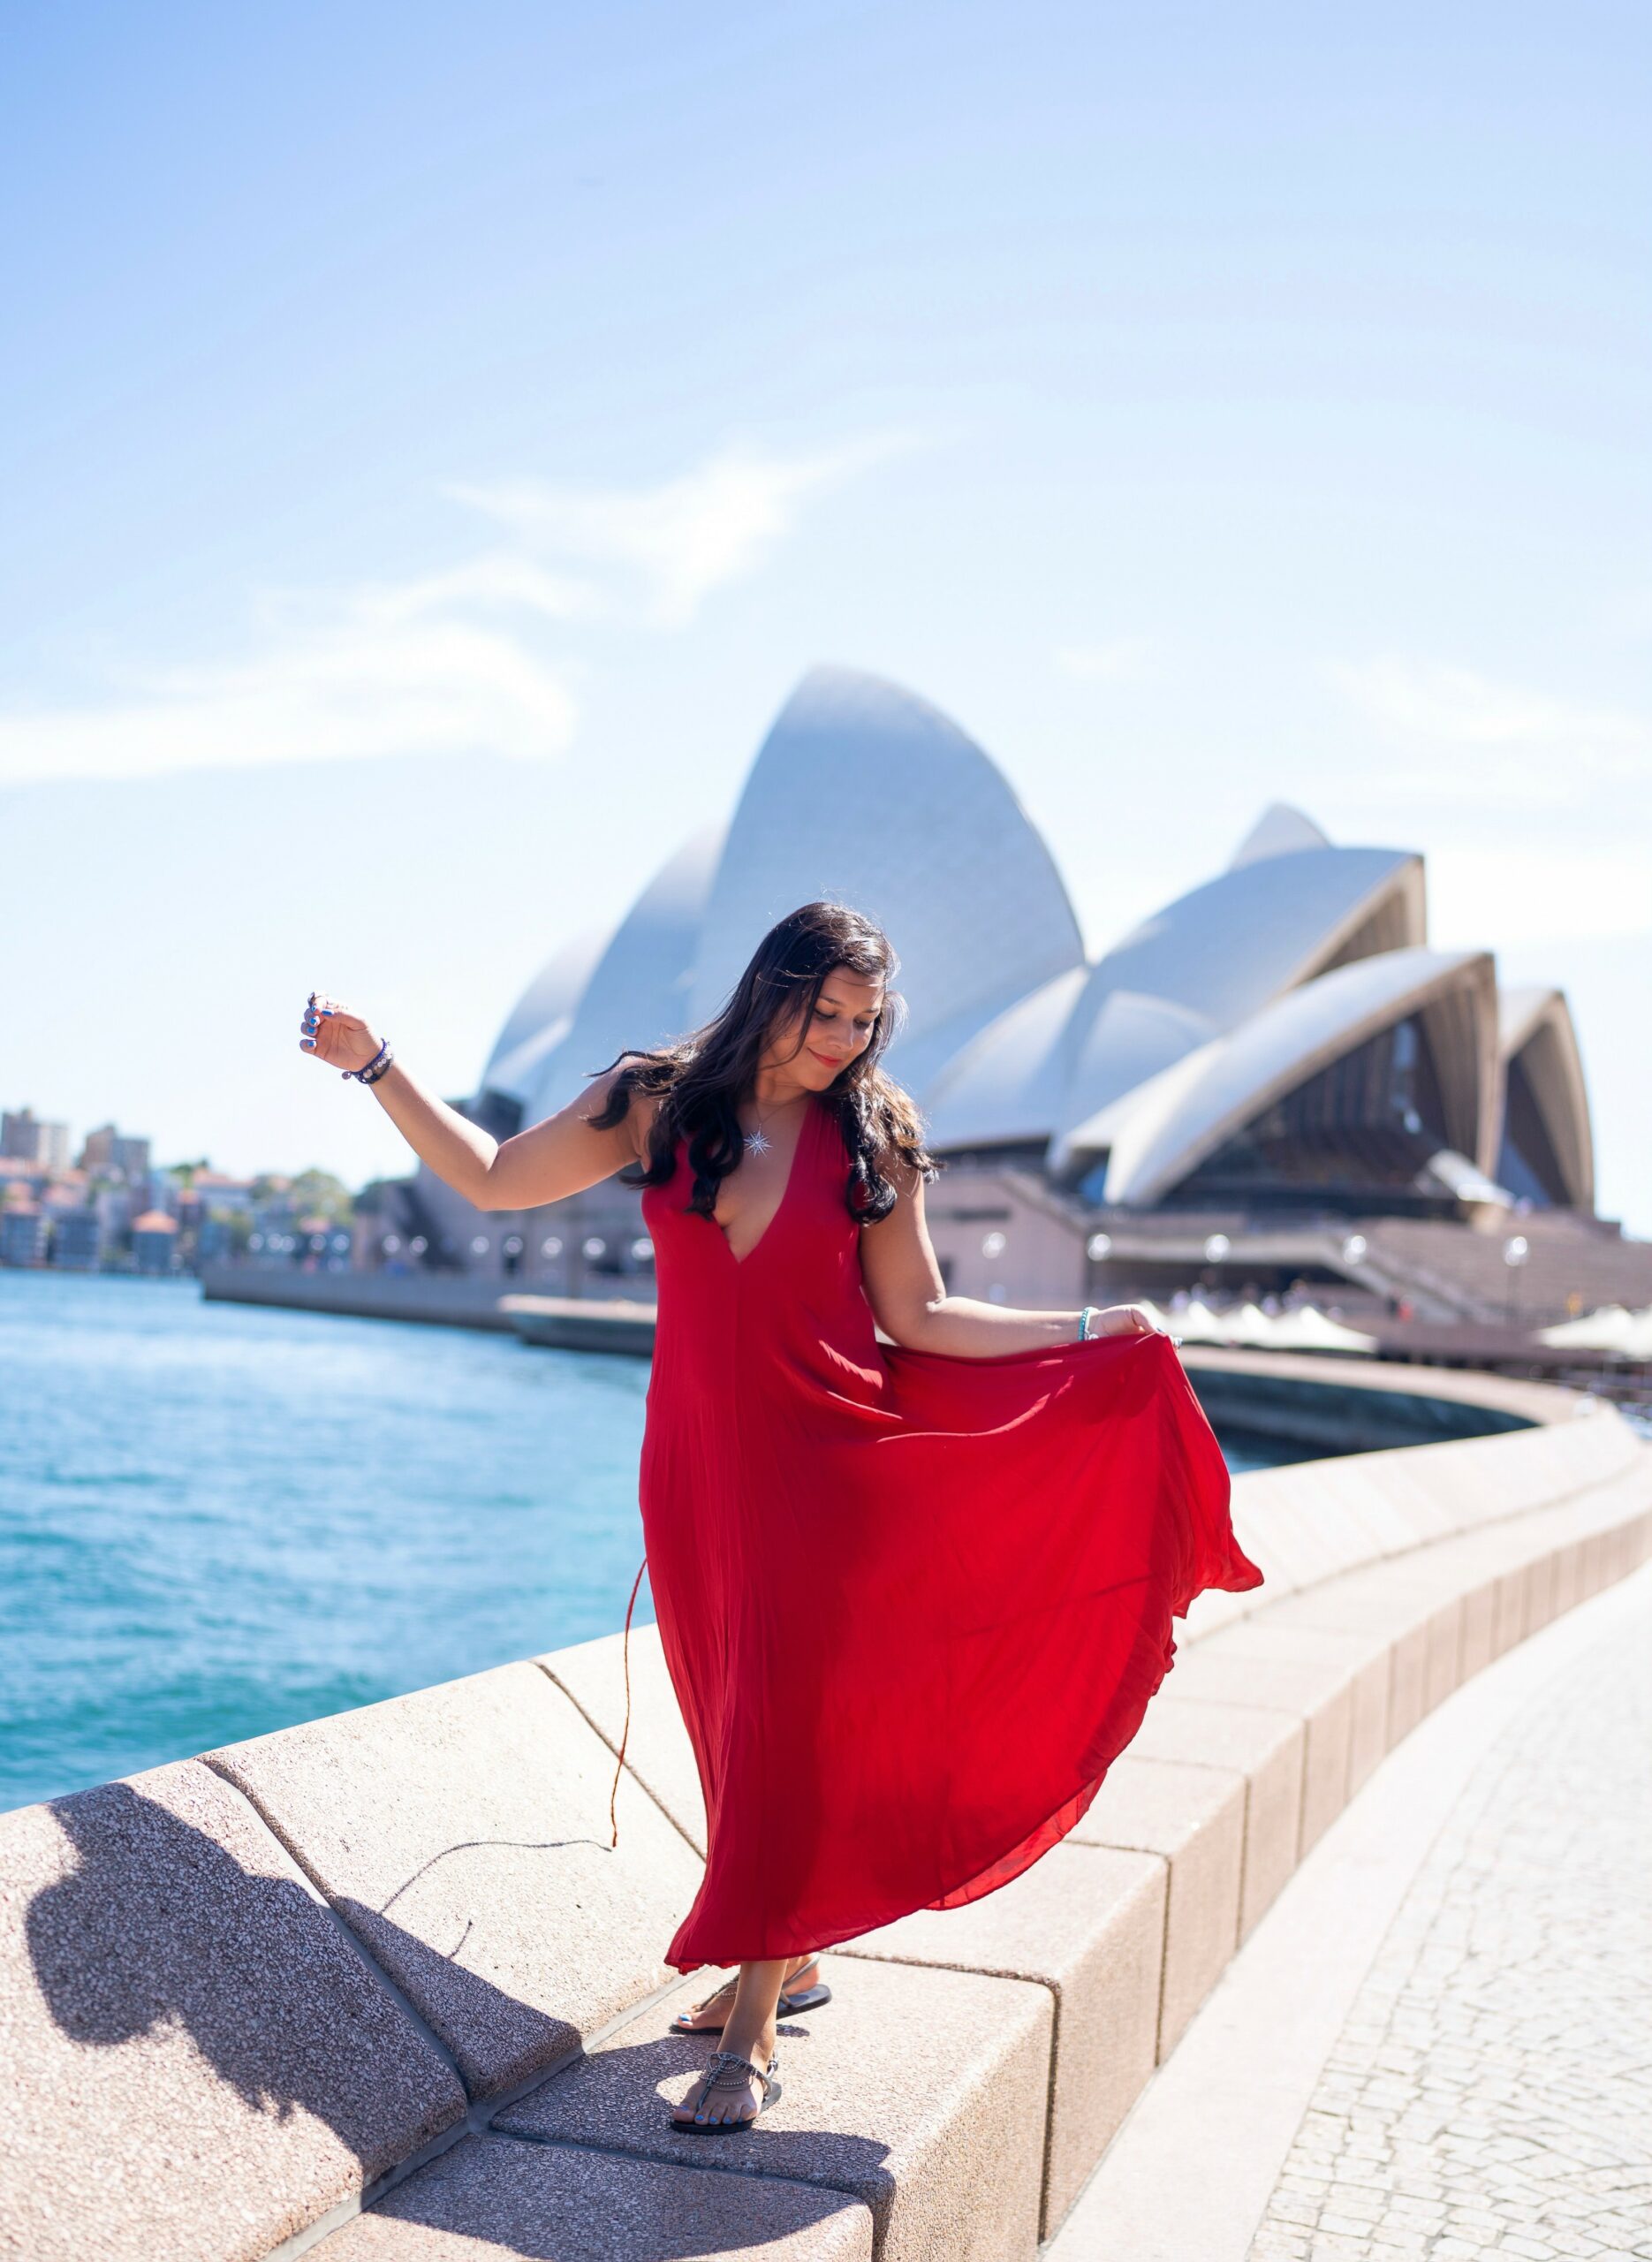 What to do in Sydney, Australia – The Perfect
Itinerary